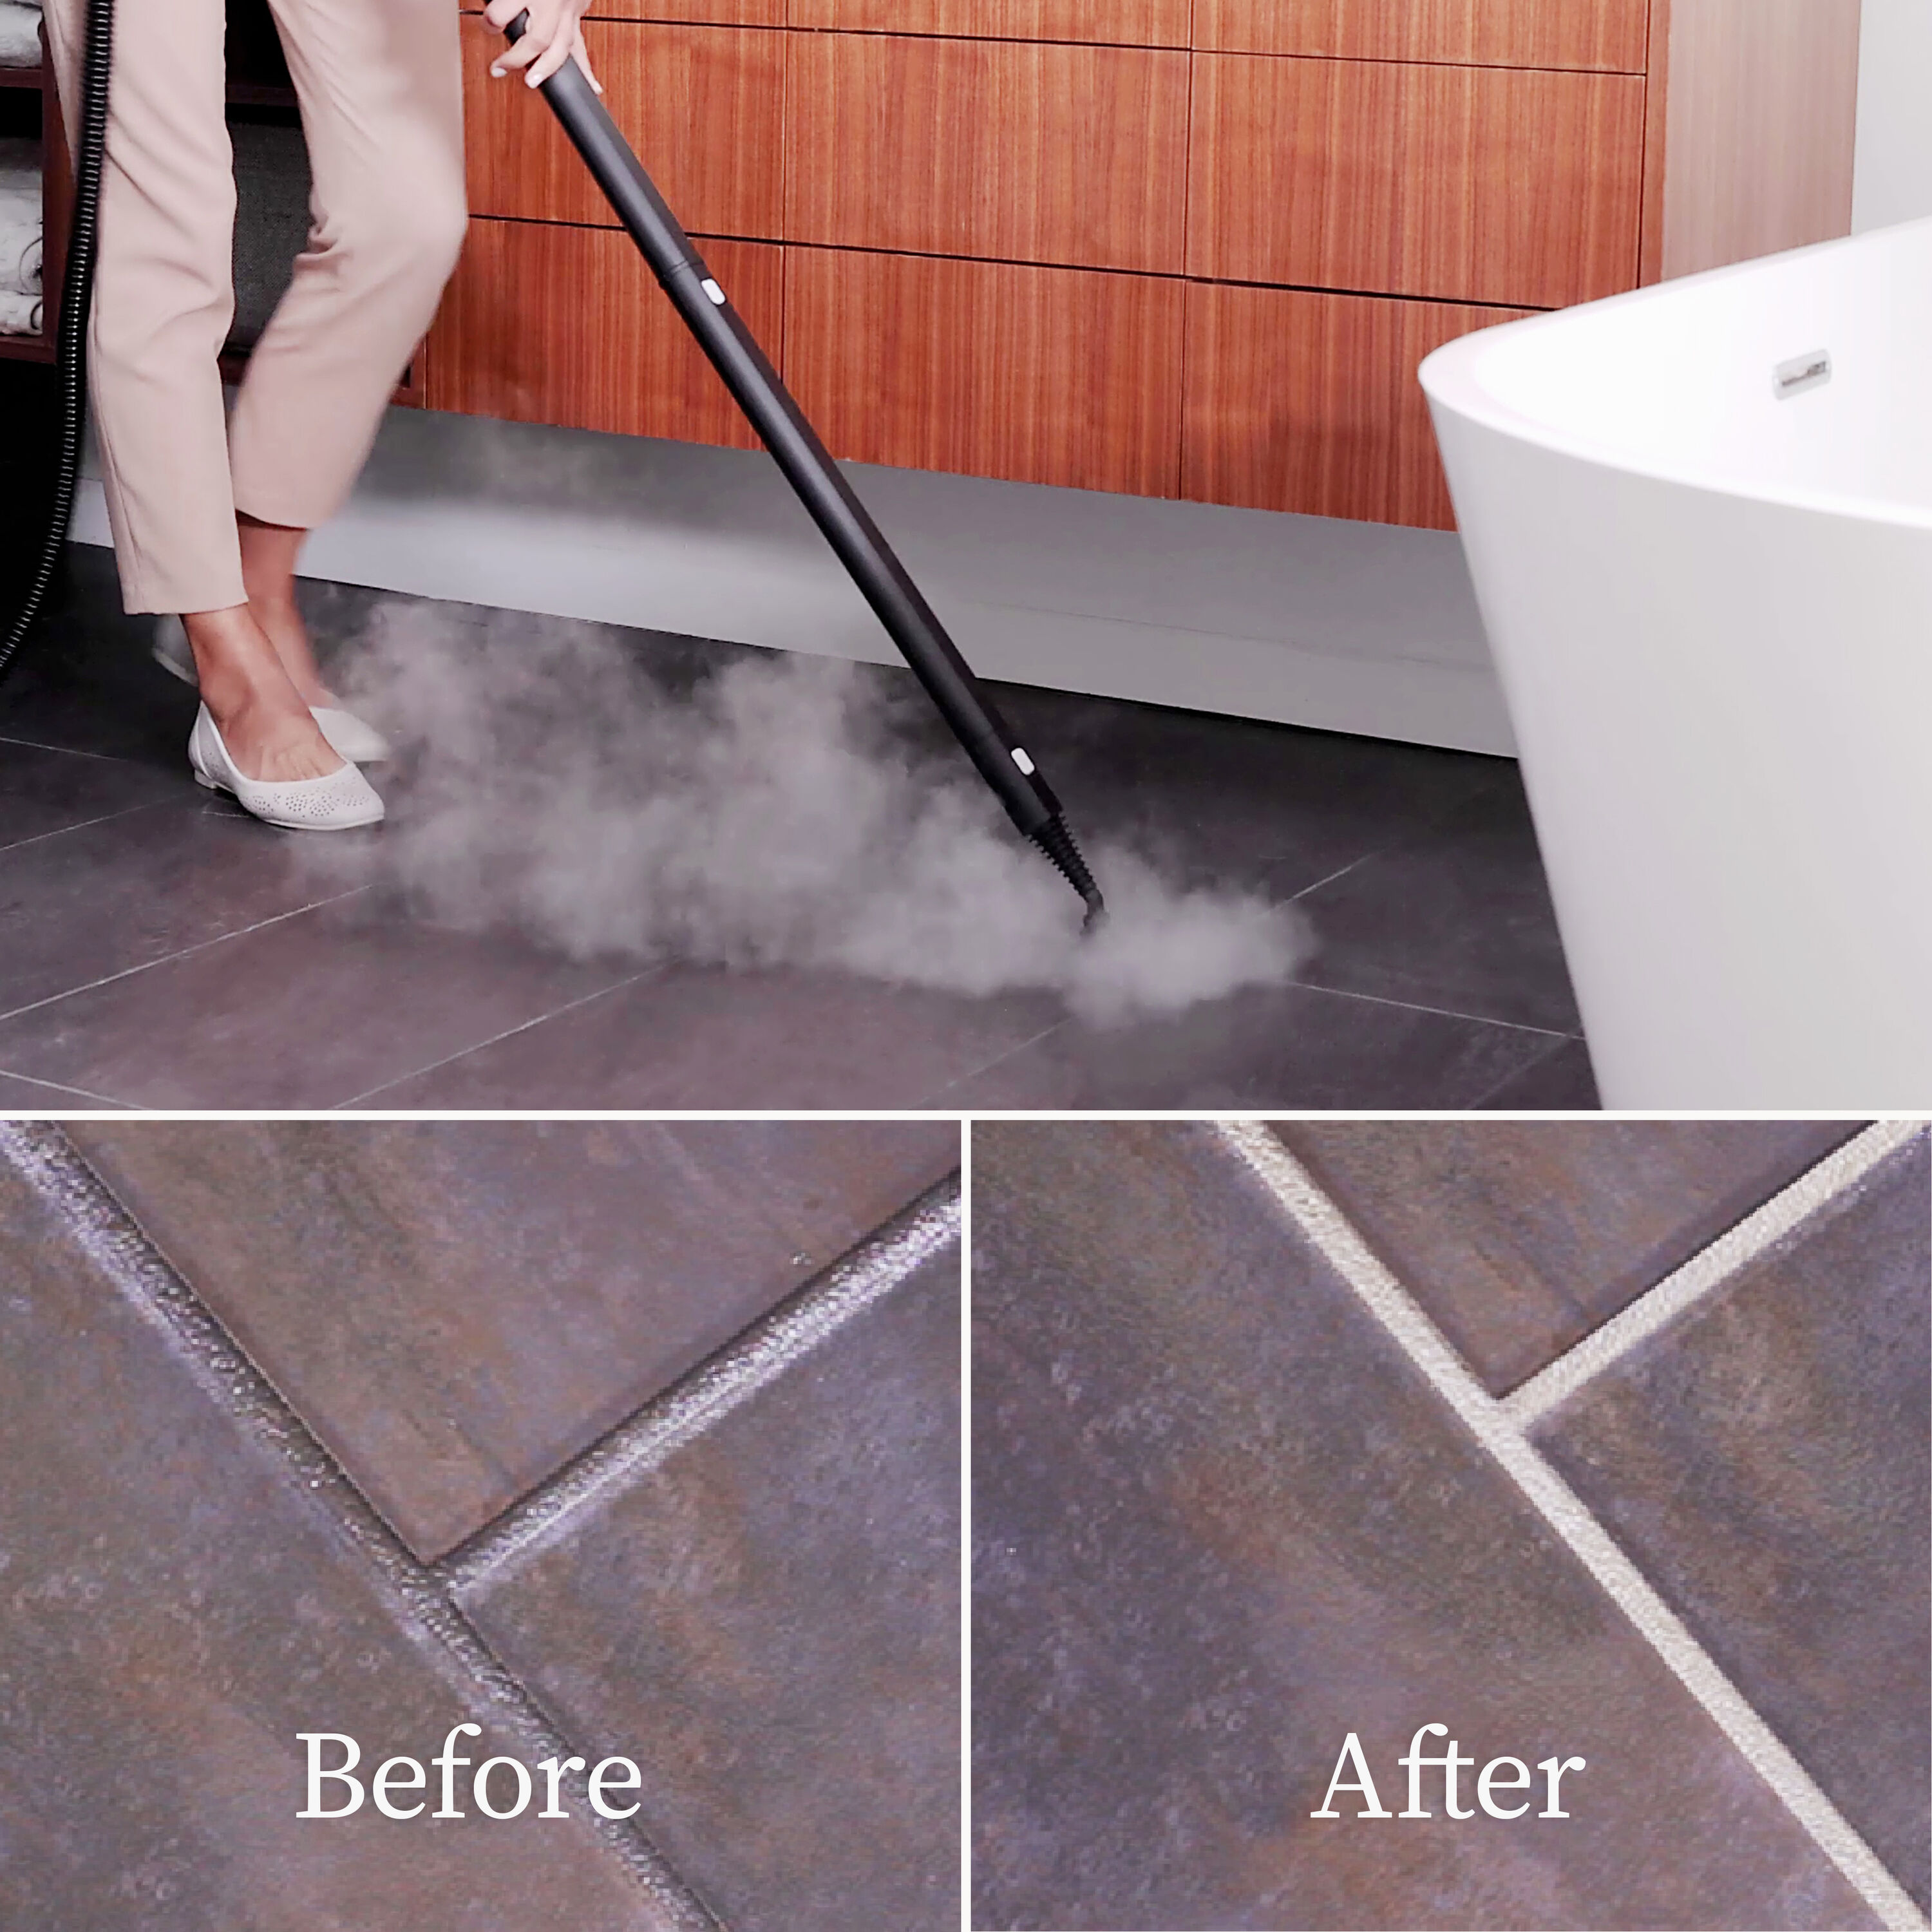 The Best Way to Clean Floor Tile Grout With Steam - Start at Home Decor